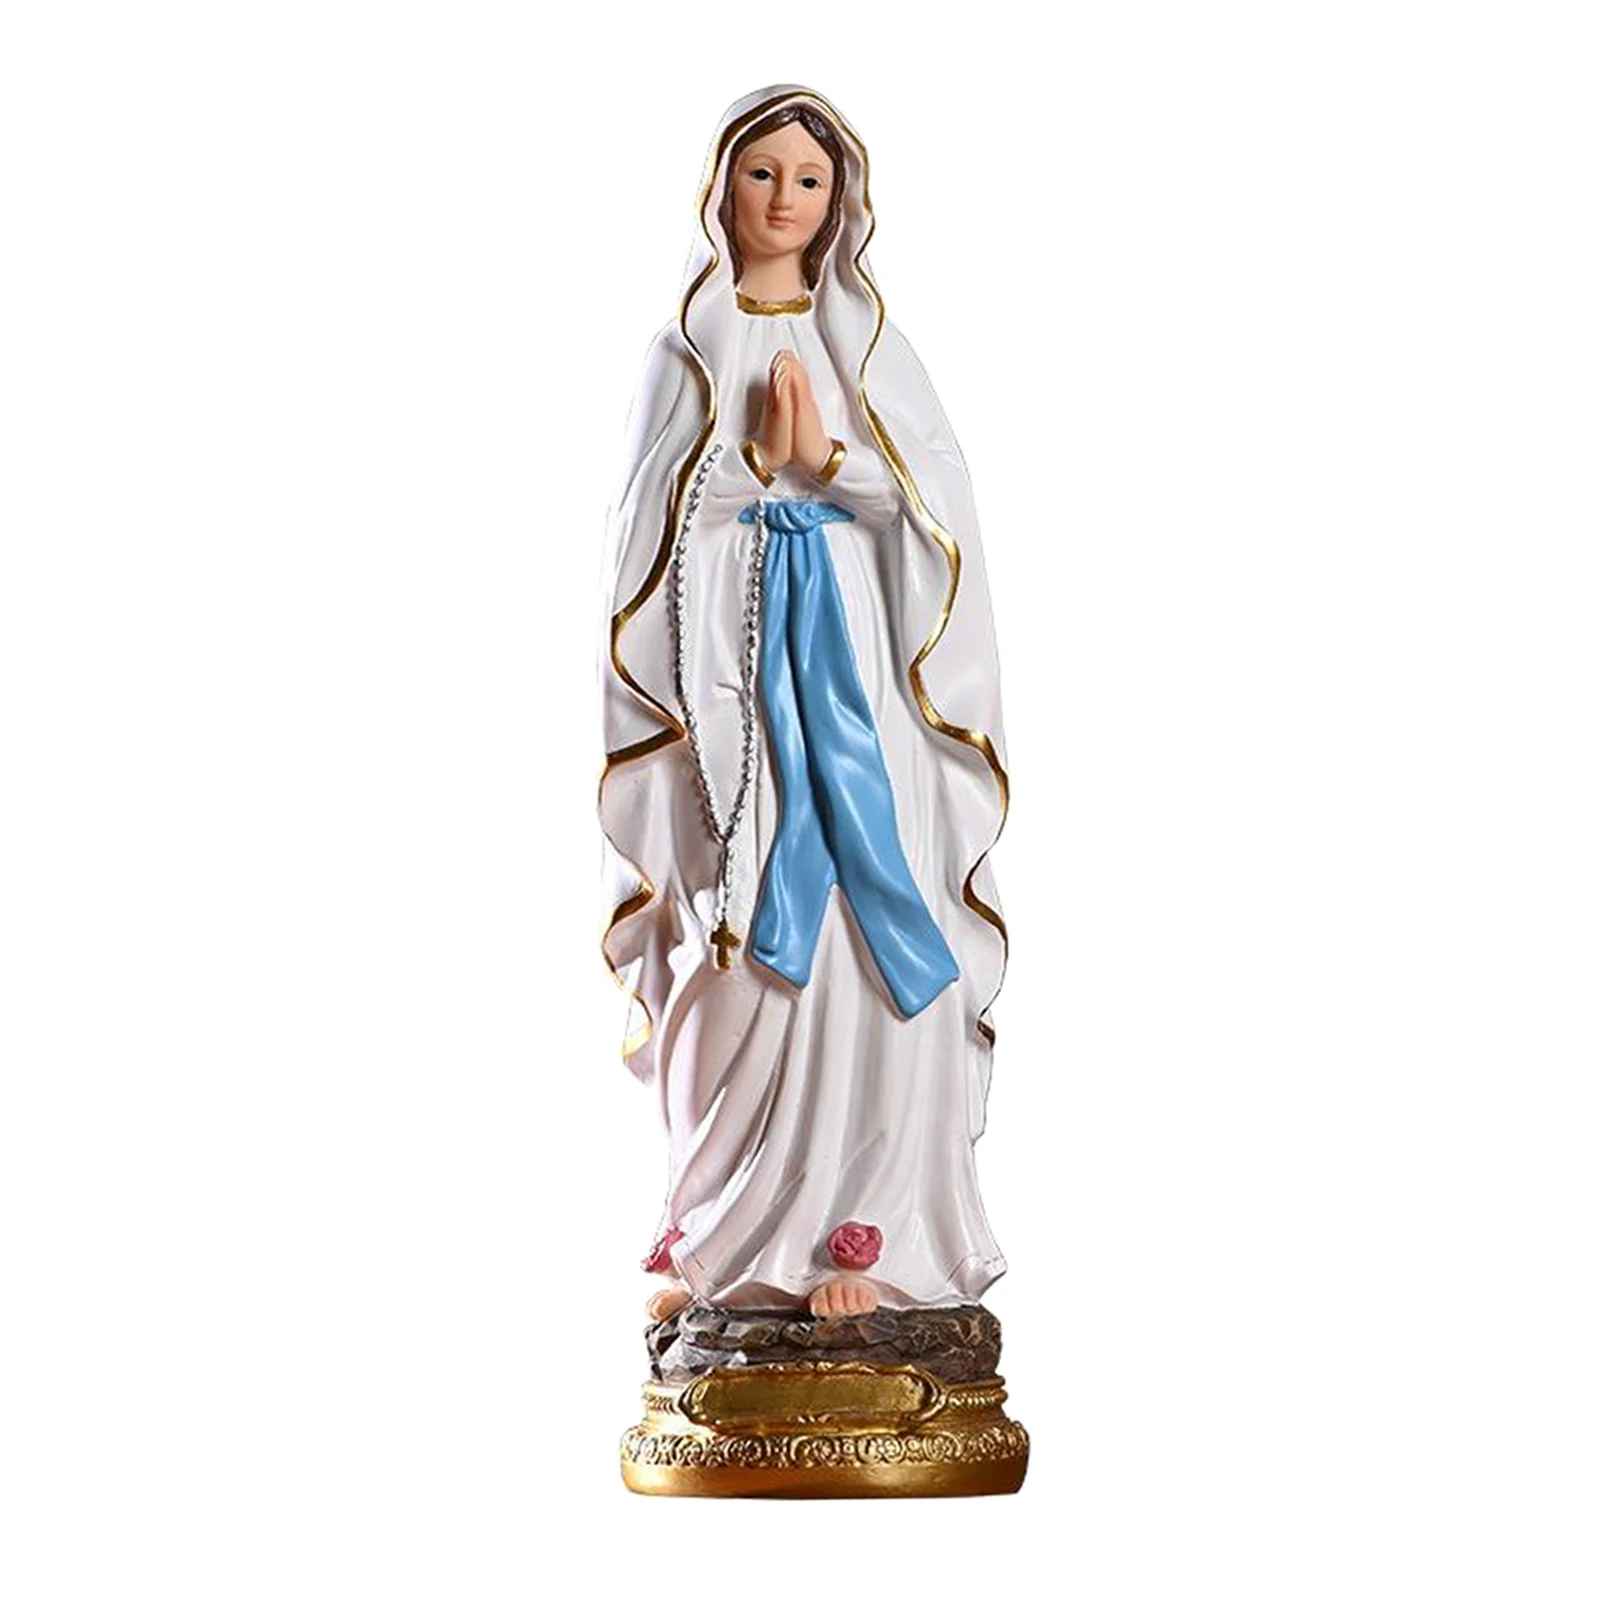 Resin Madonna Blessed Saint Virgin Our Lady of Lourds Mary Statue Figure Christ Tabletop Statue Figurine